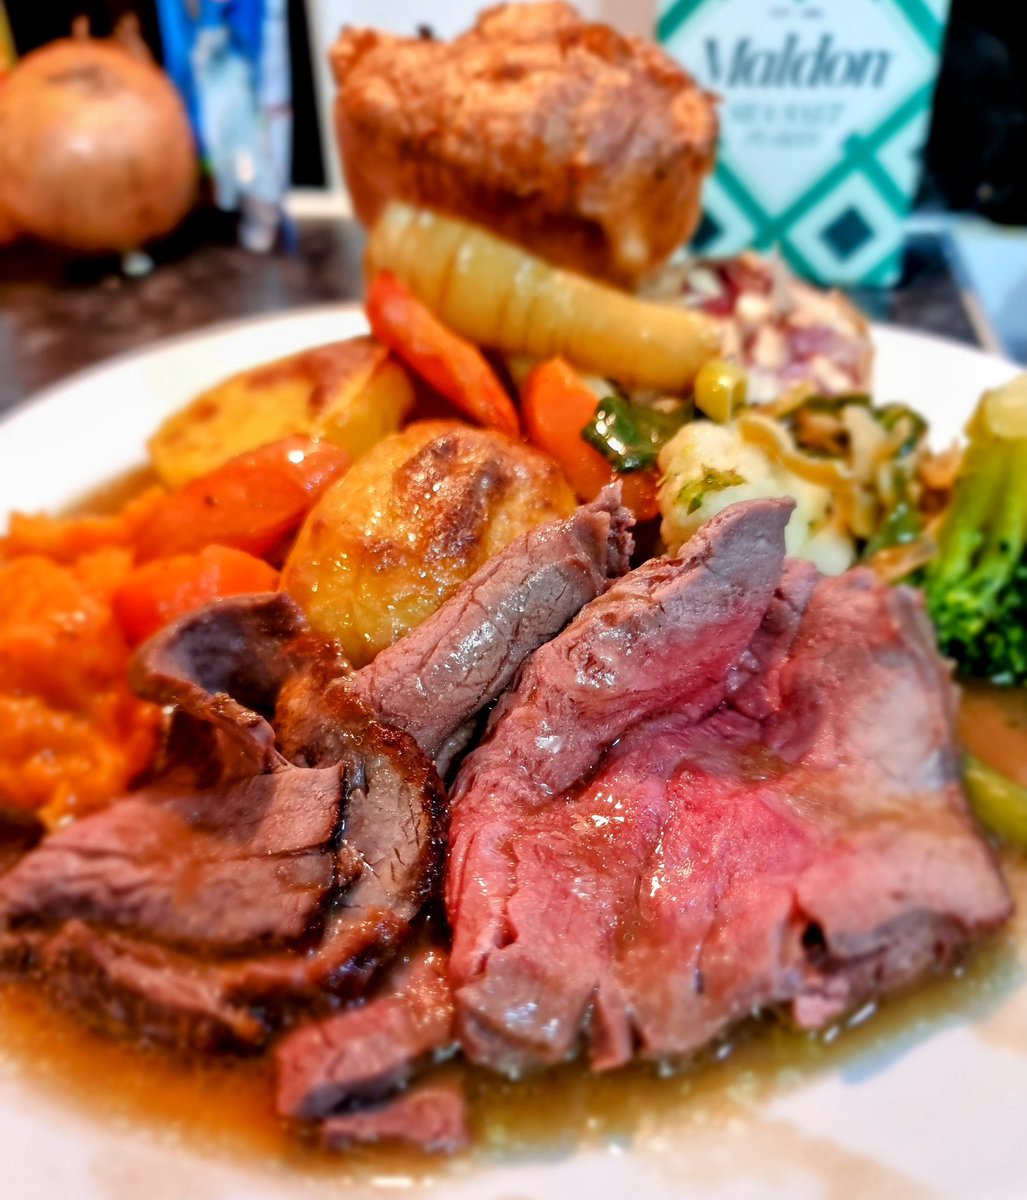 Roast Beef.
Cooked on the probe to 49°c core. Everyone had seconds 🥰
#pinkbeef 
#sundaylunch 
@maldonsalt